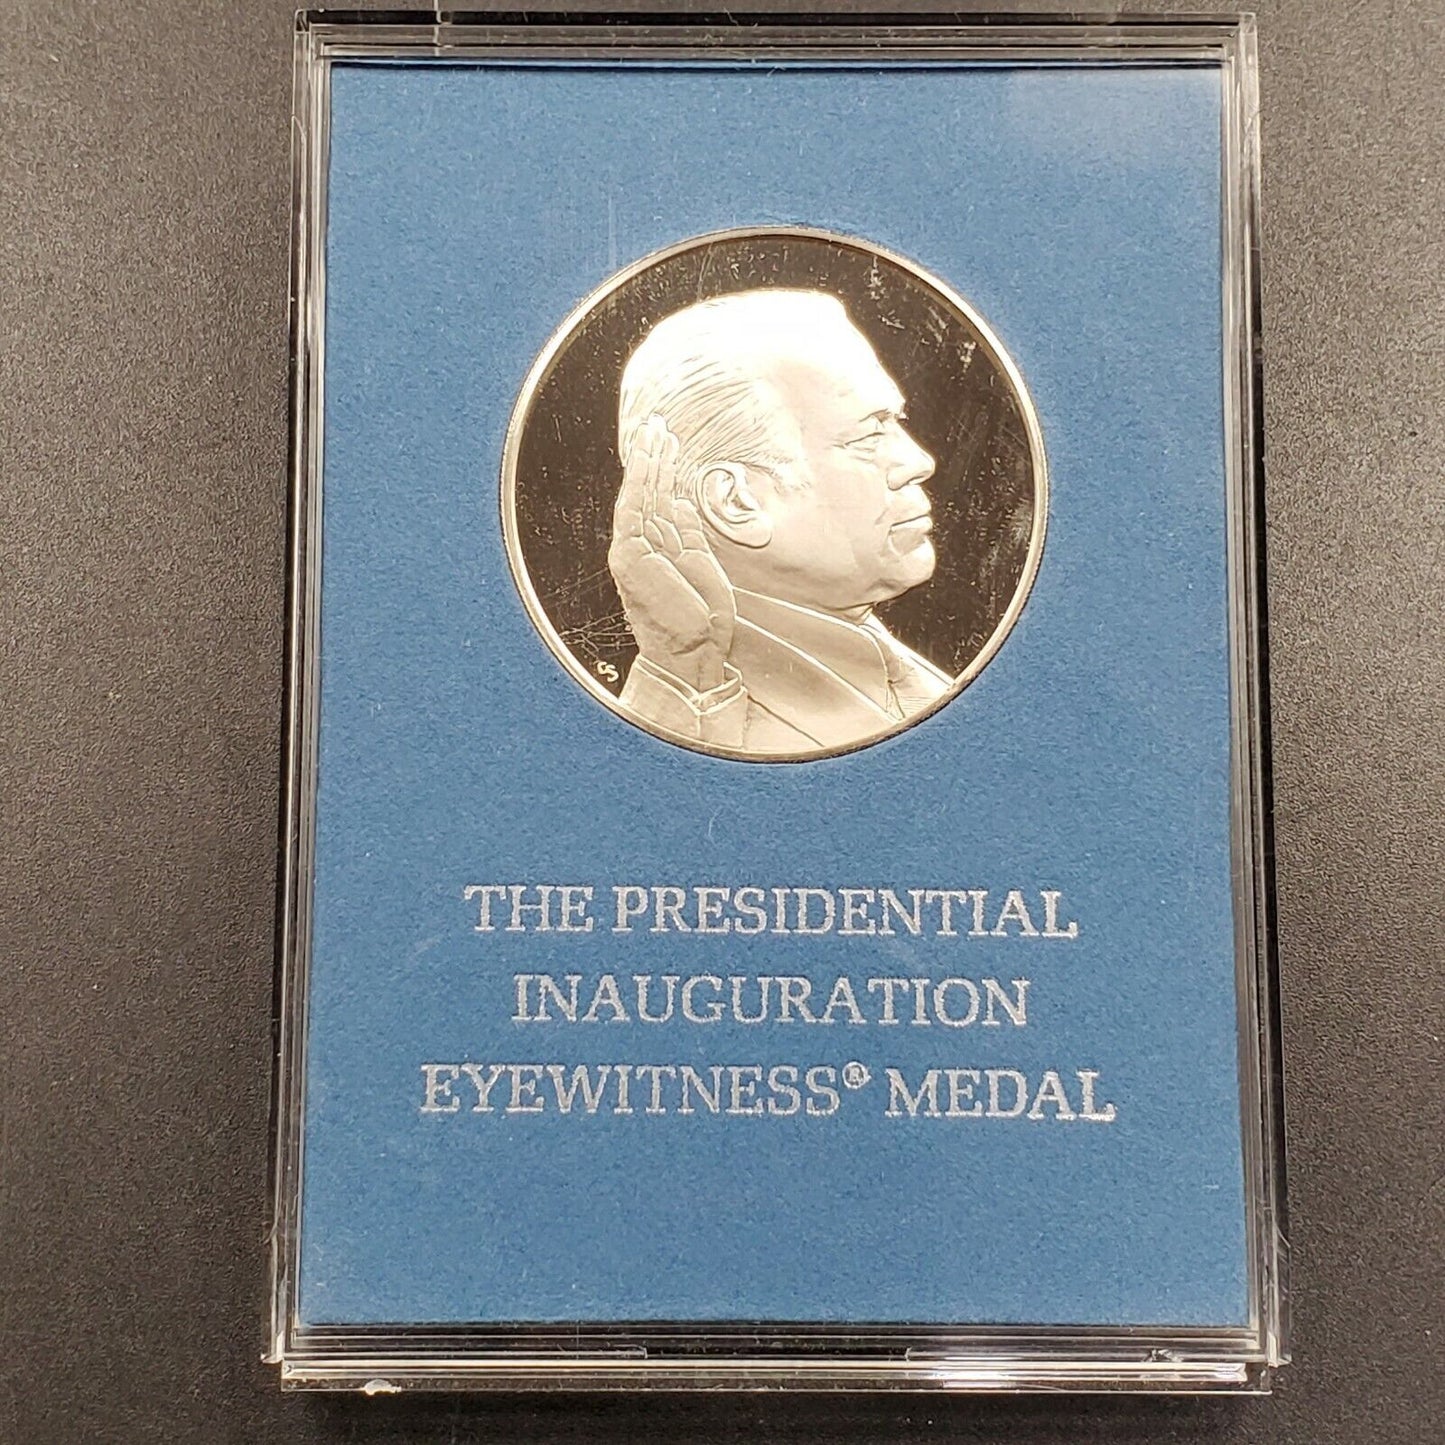 The 1974 Presidential Inauguration Eyewitness Proof Medal Silver Gerald Ford